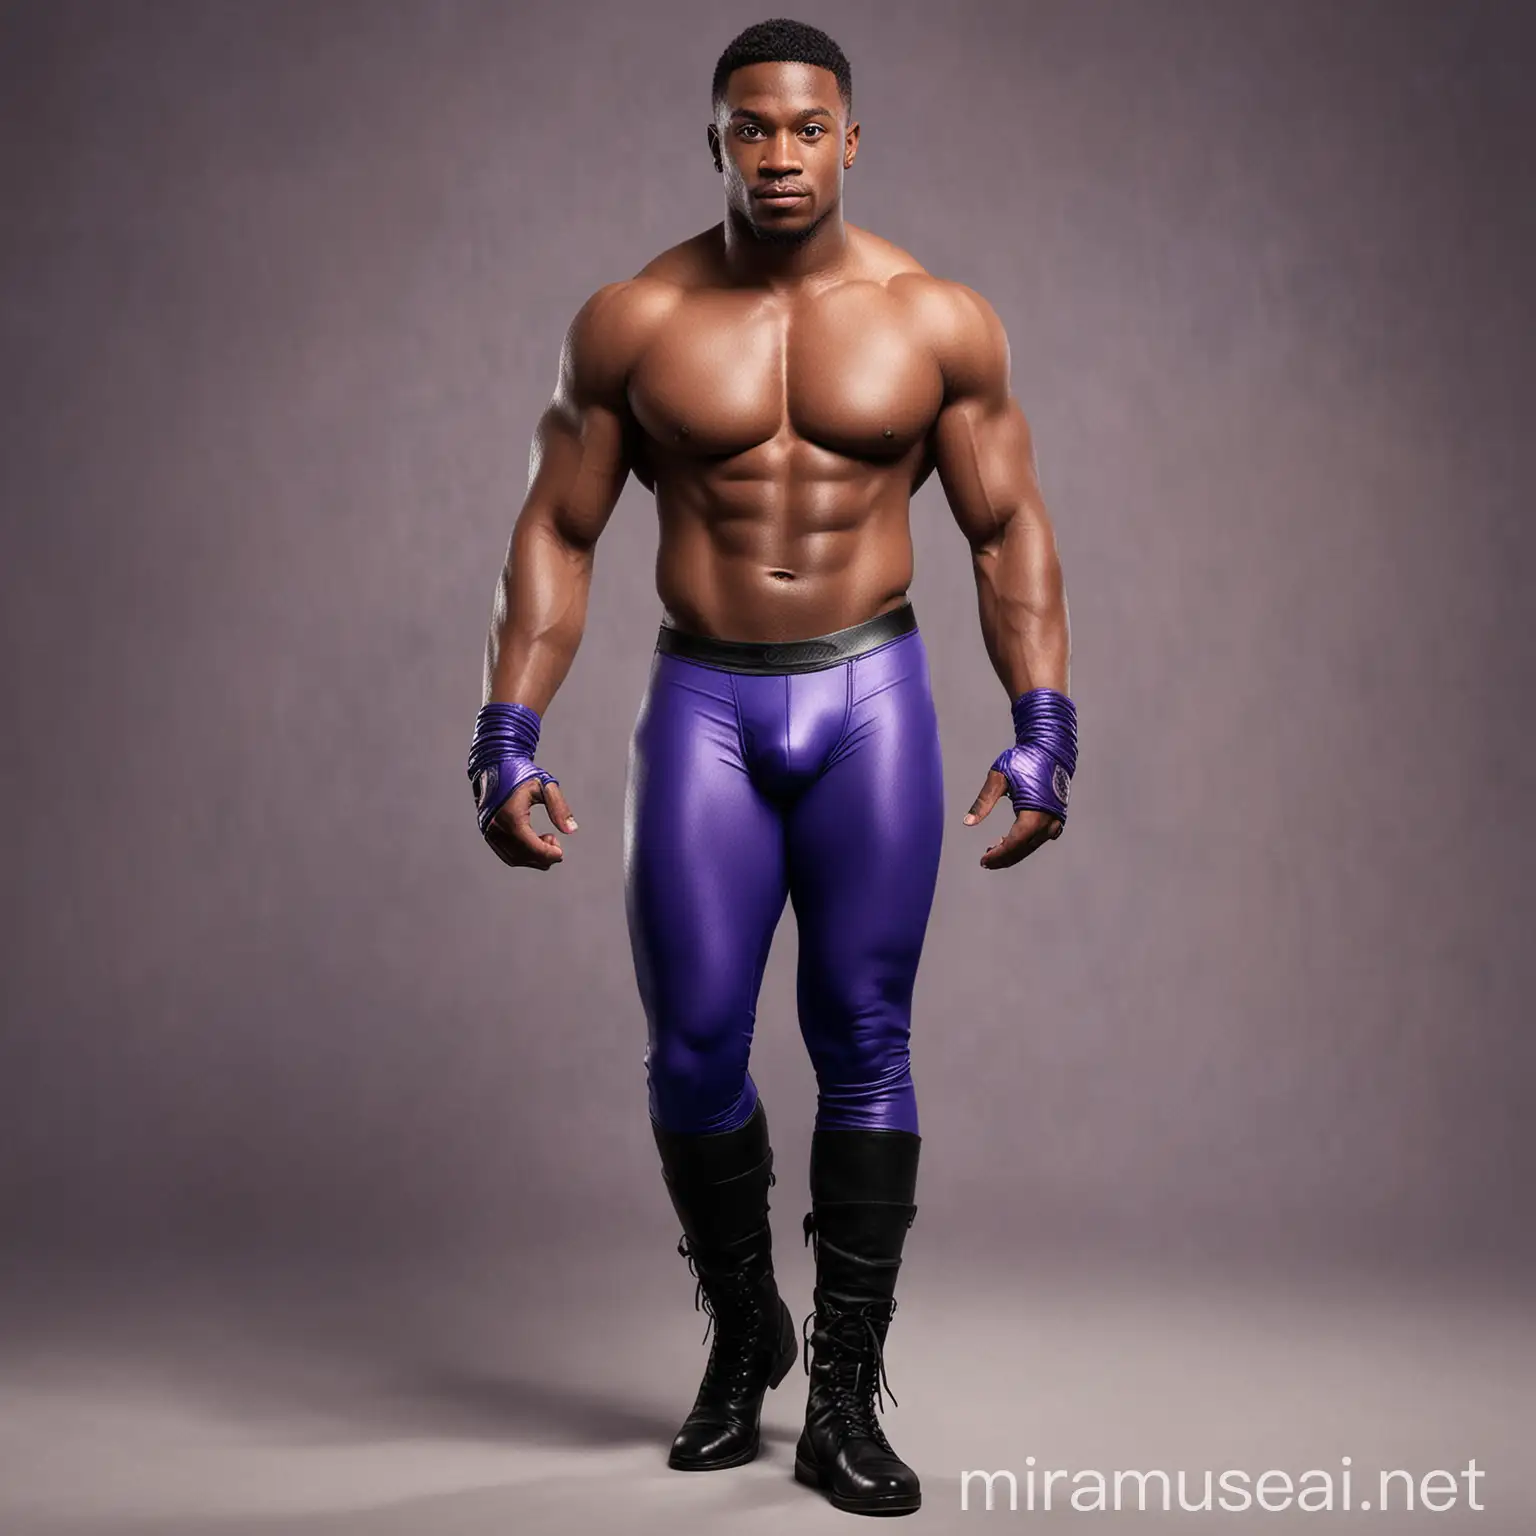 Charming shirtless muscular 30 year old male African American wrestler, with brown eyes, wearing  long cobalt blue (leaning to purple) and black spandex leggings, plus some energy wristbands amd black boots. Rear view.  Pixar style art.